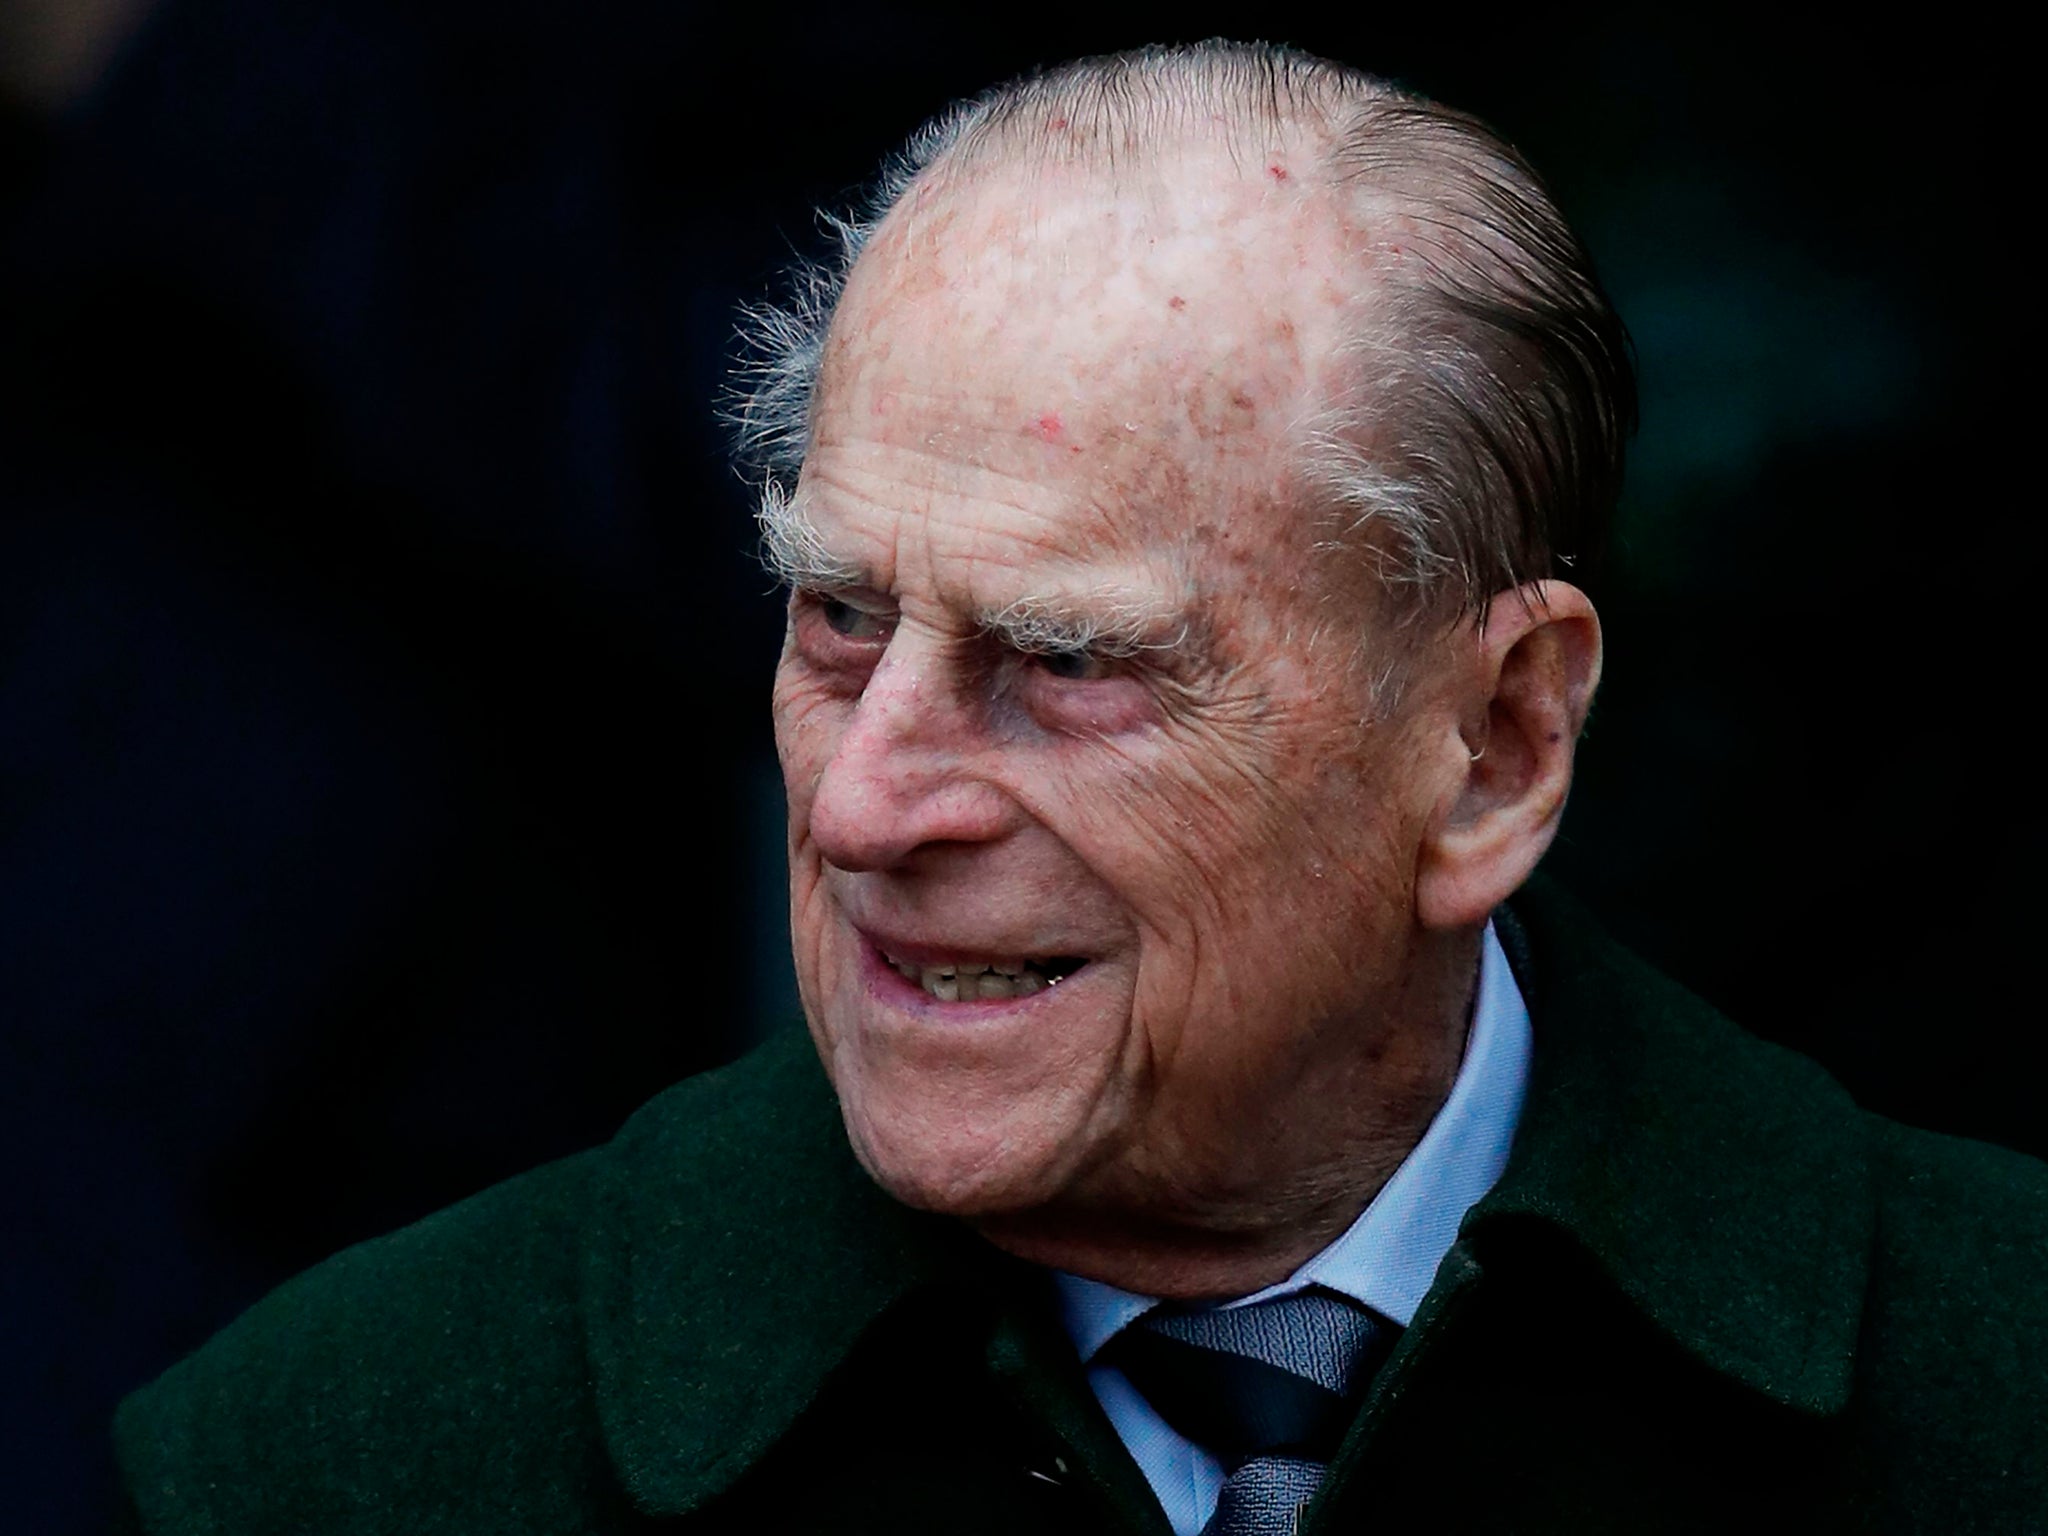 Prince Philip has been admitted to hospital for hip surgery